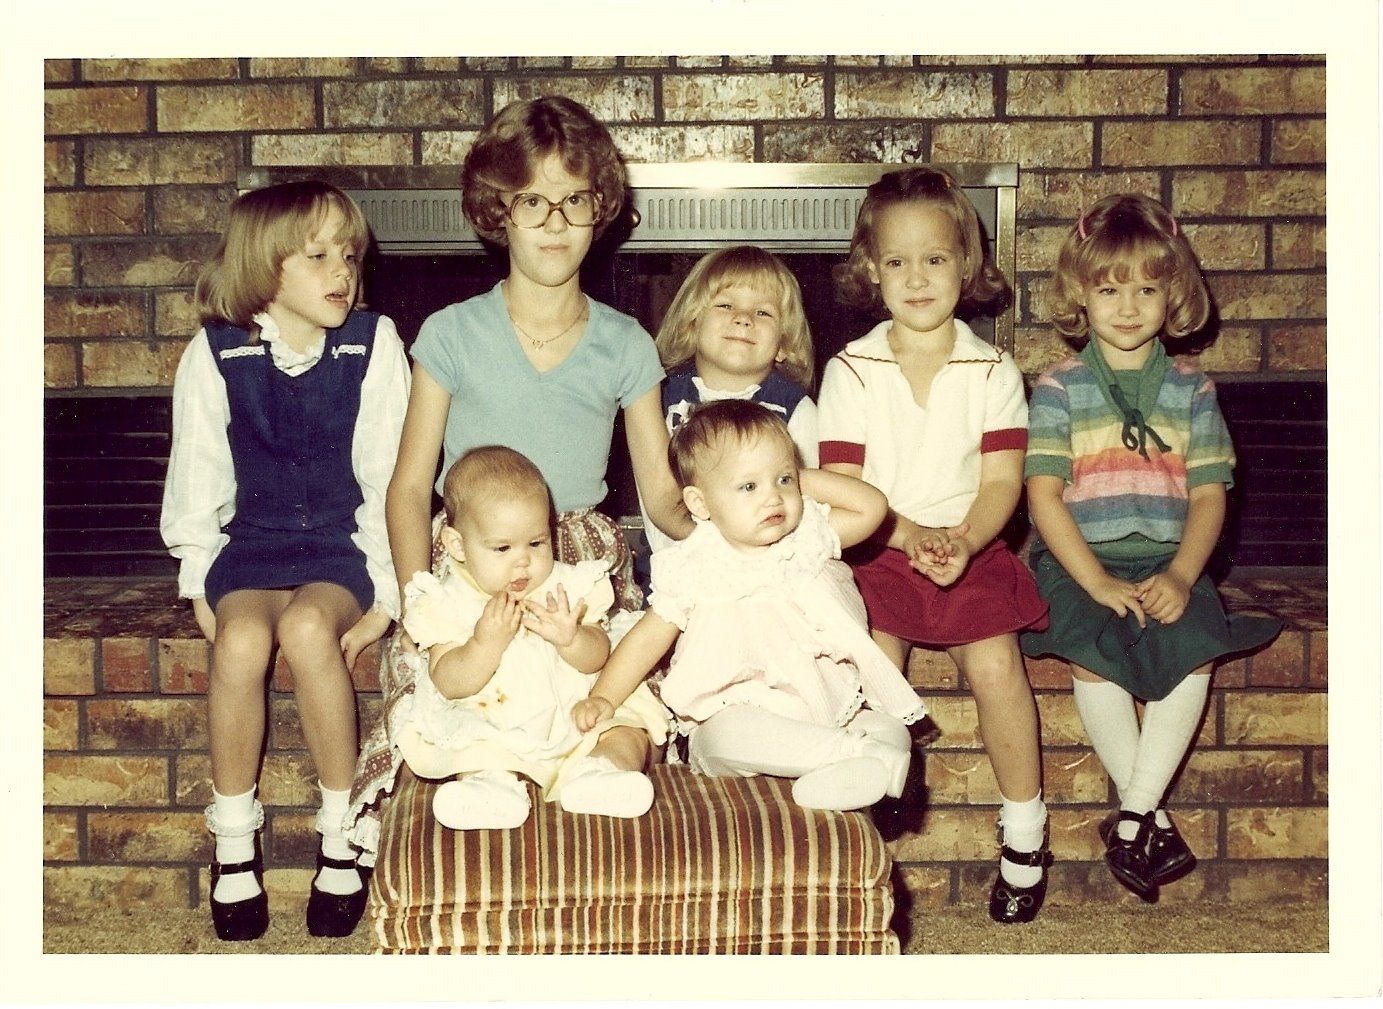 [Mary+&+Cousins+in+1980.jpg]